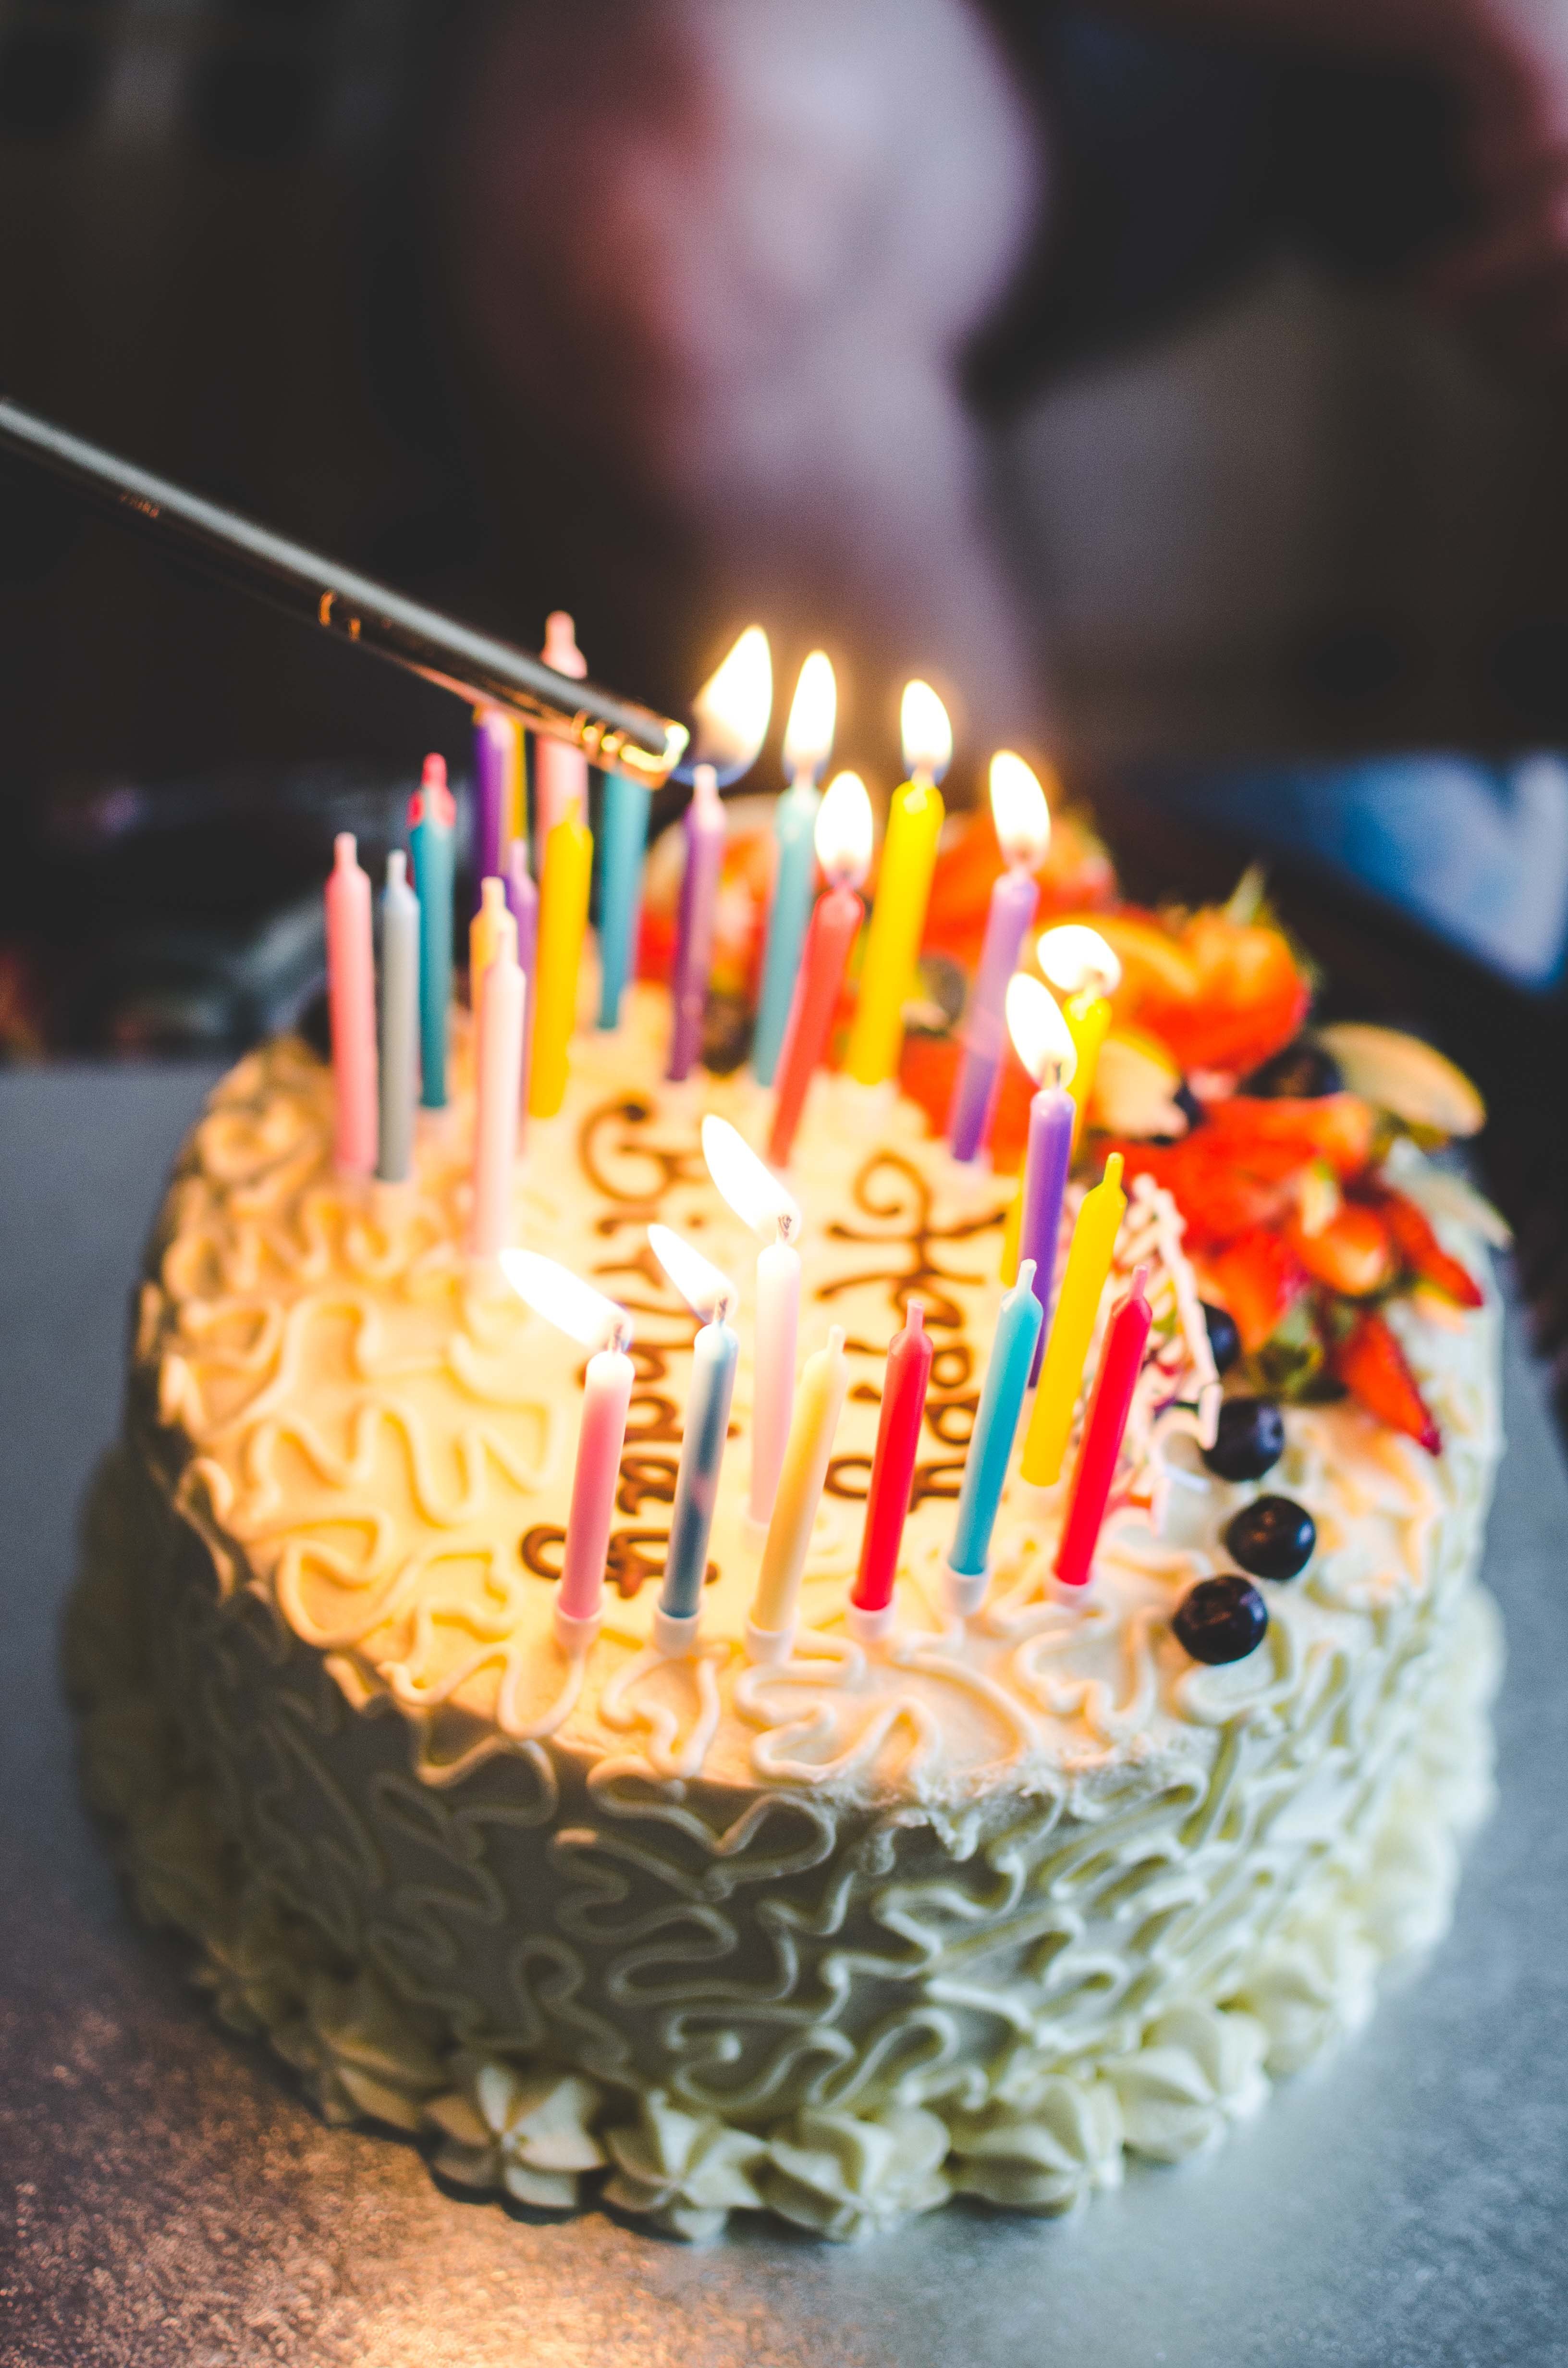 Linda's plans started to unravel when her mom surprised her with a birthday party attended by her relatives and schoolmates | Source: Pexels